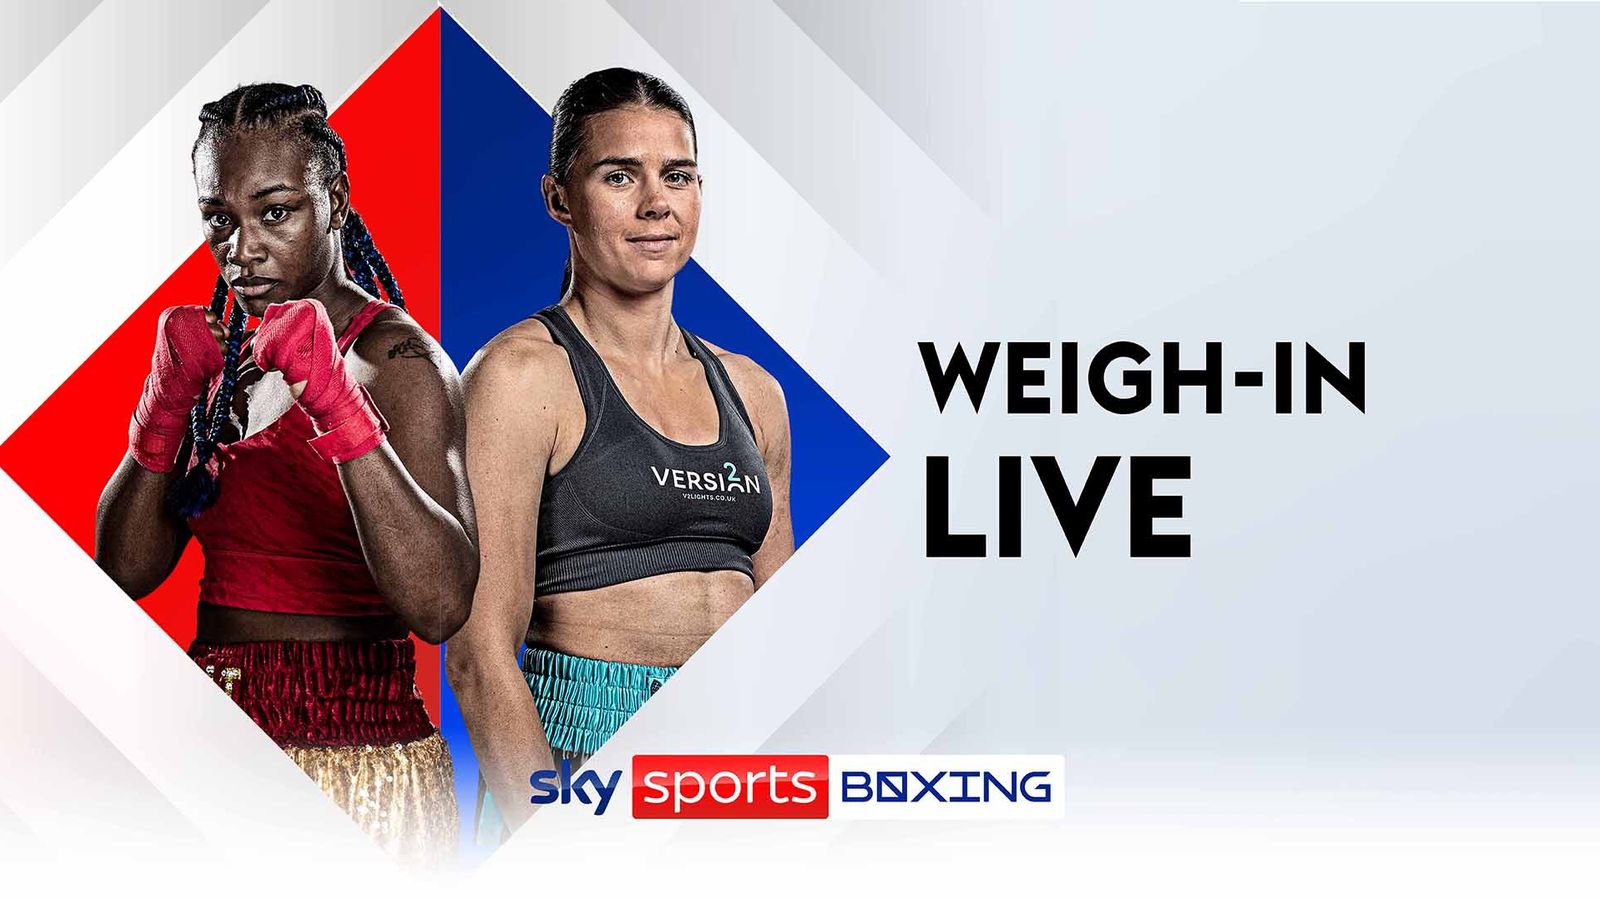 Claressa Shields vs Savannah Marshall: Watch live stream of weigh-in ahead of undisputed world title fight